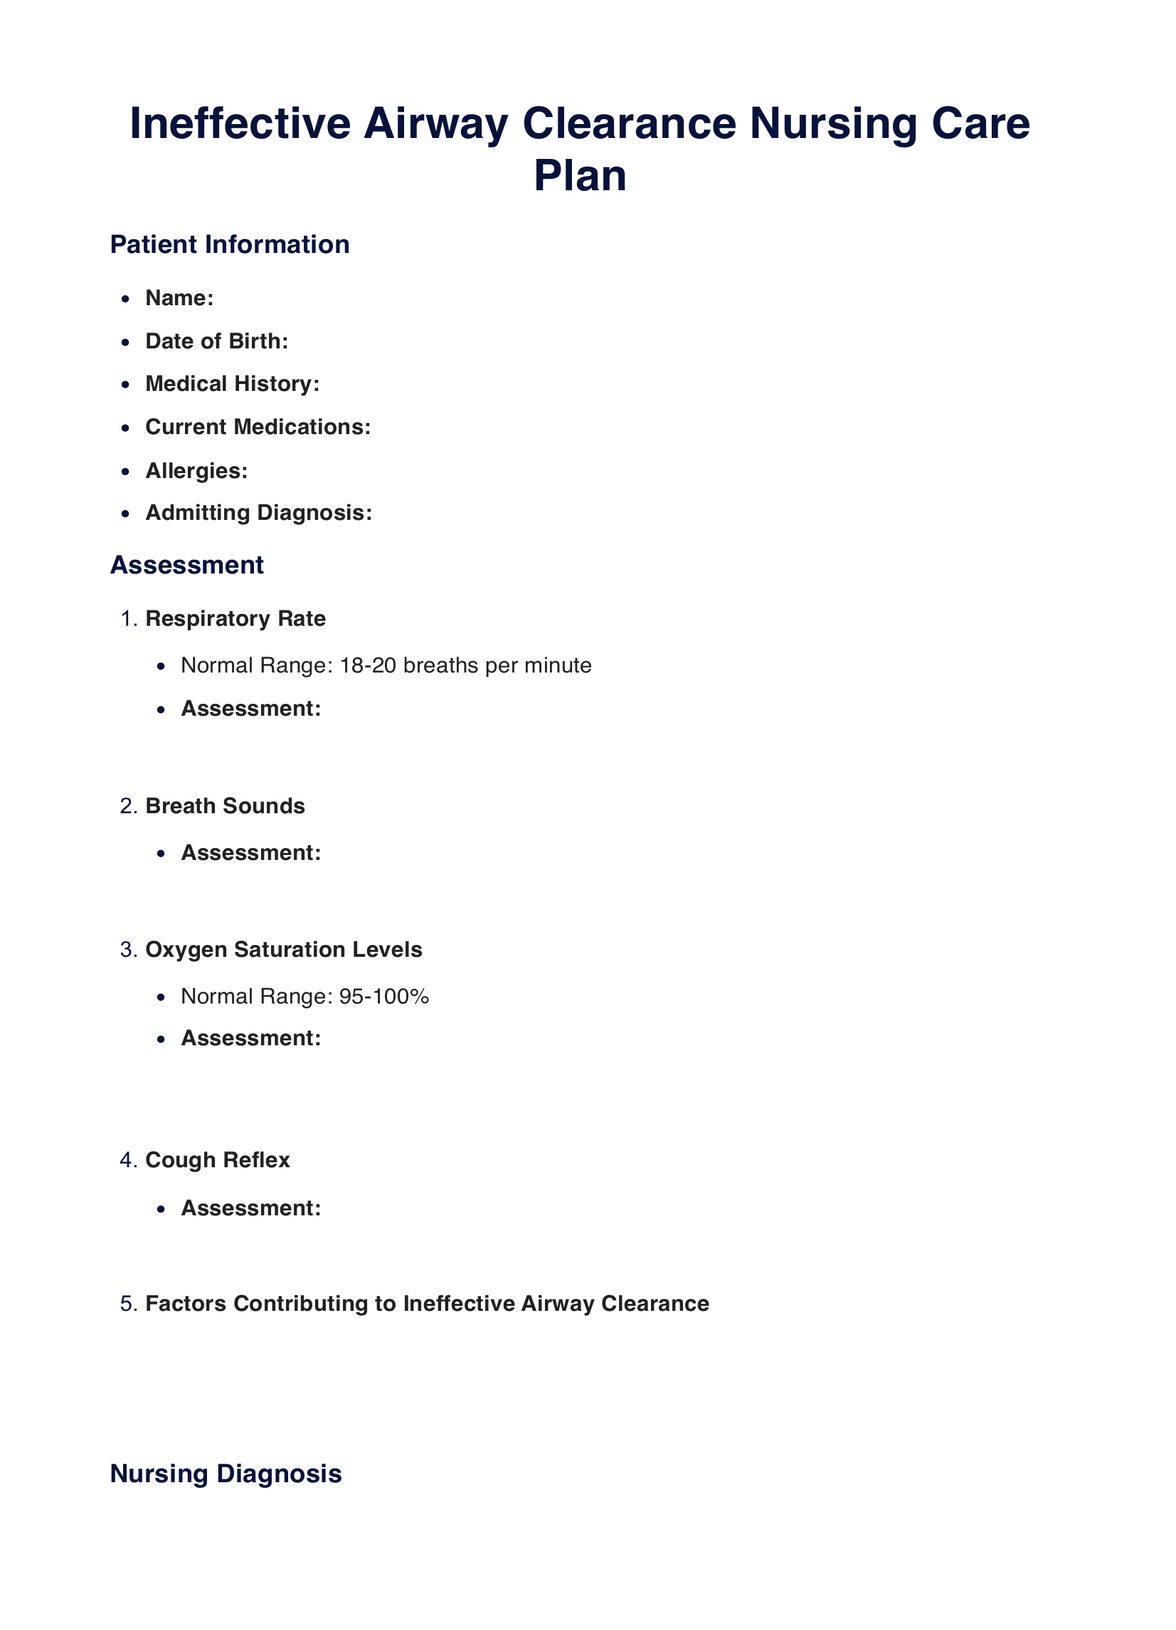 Ineffective Airway Clearance Nursing Care Plan Template PDF Example